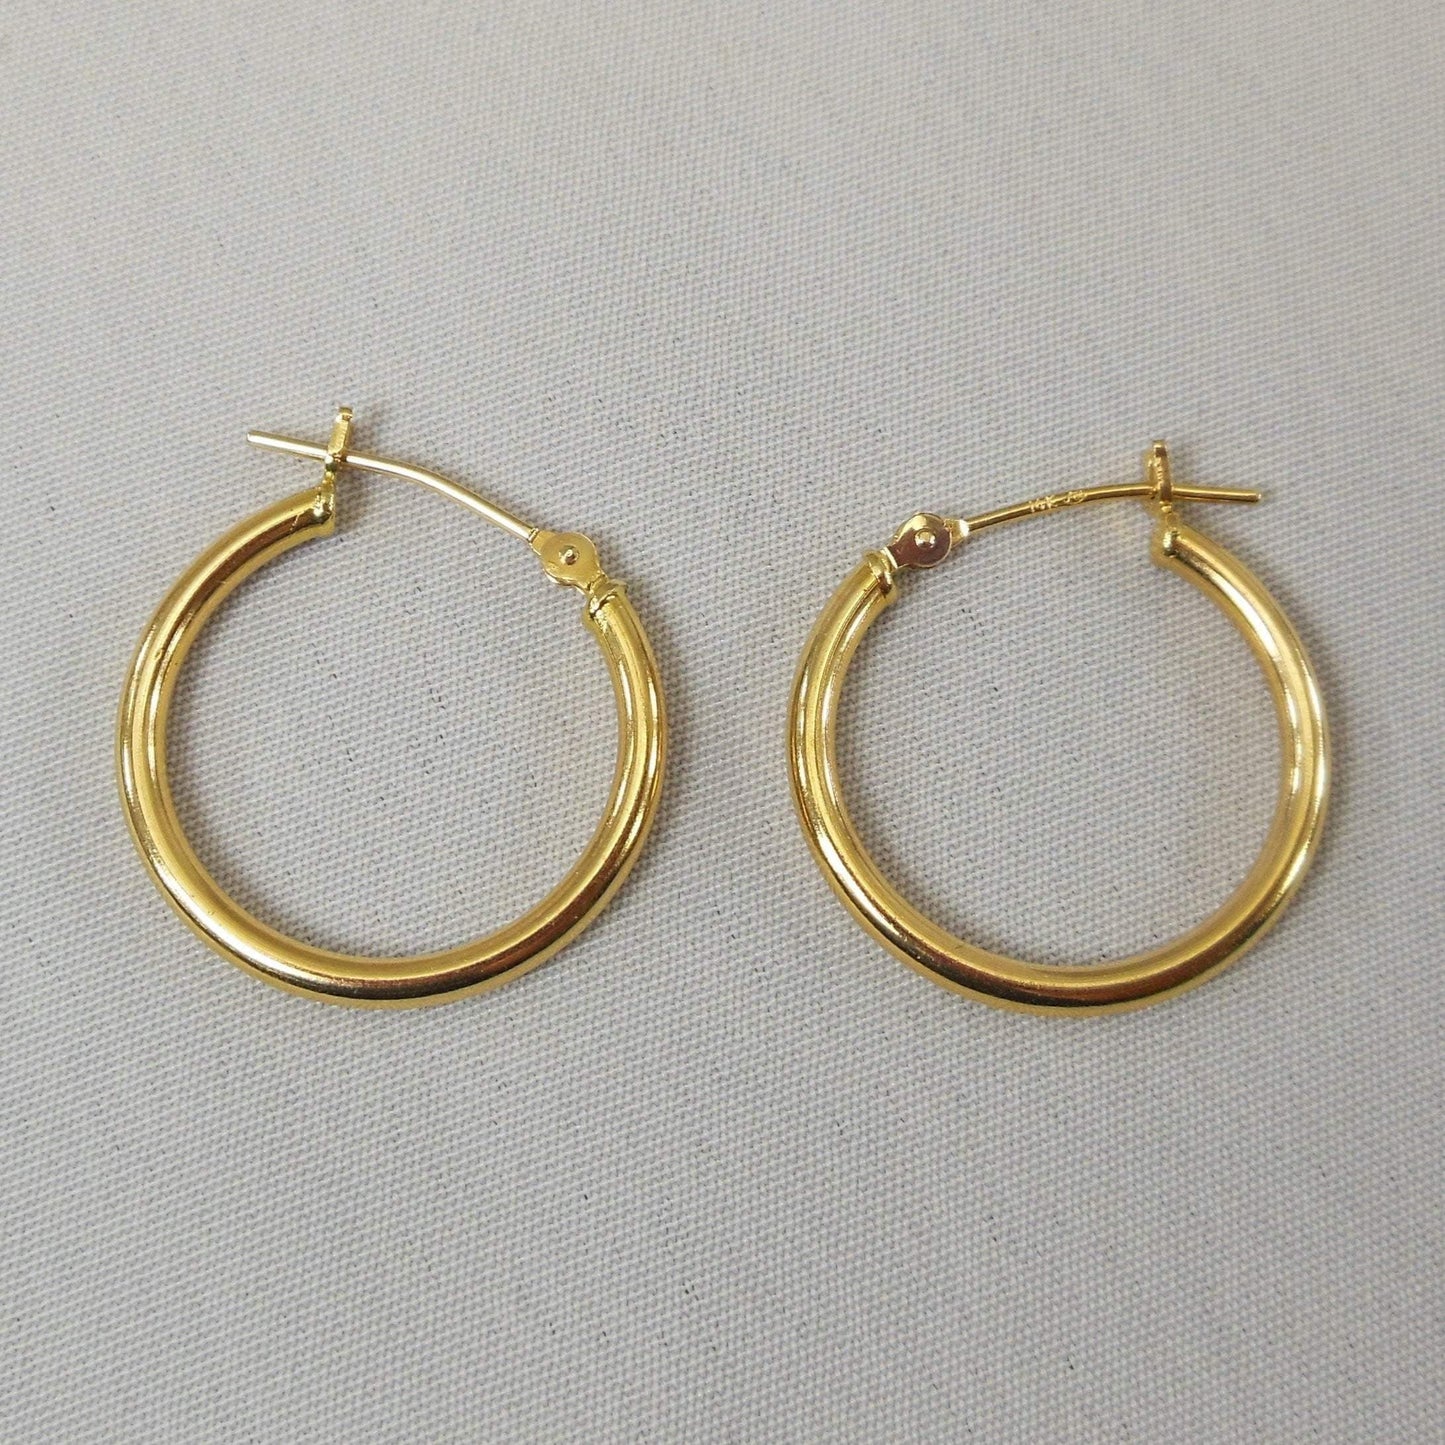 Michael  Anthony NY Pair Estate 14K Yellow Gold Hoop Earrings 20 mm 1 Gram Smooth